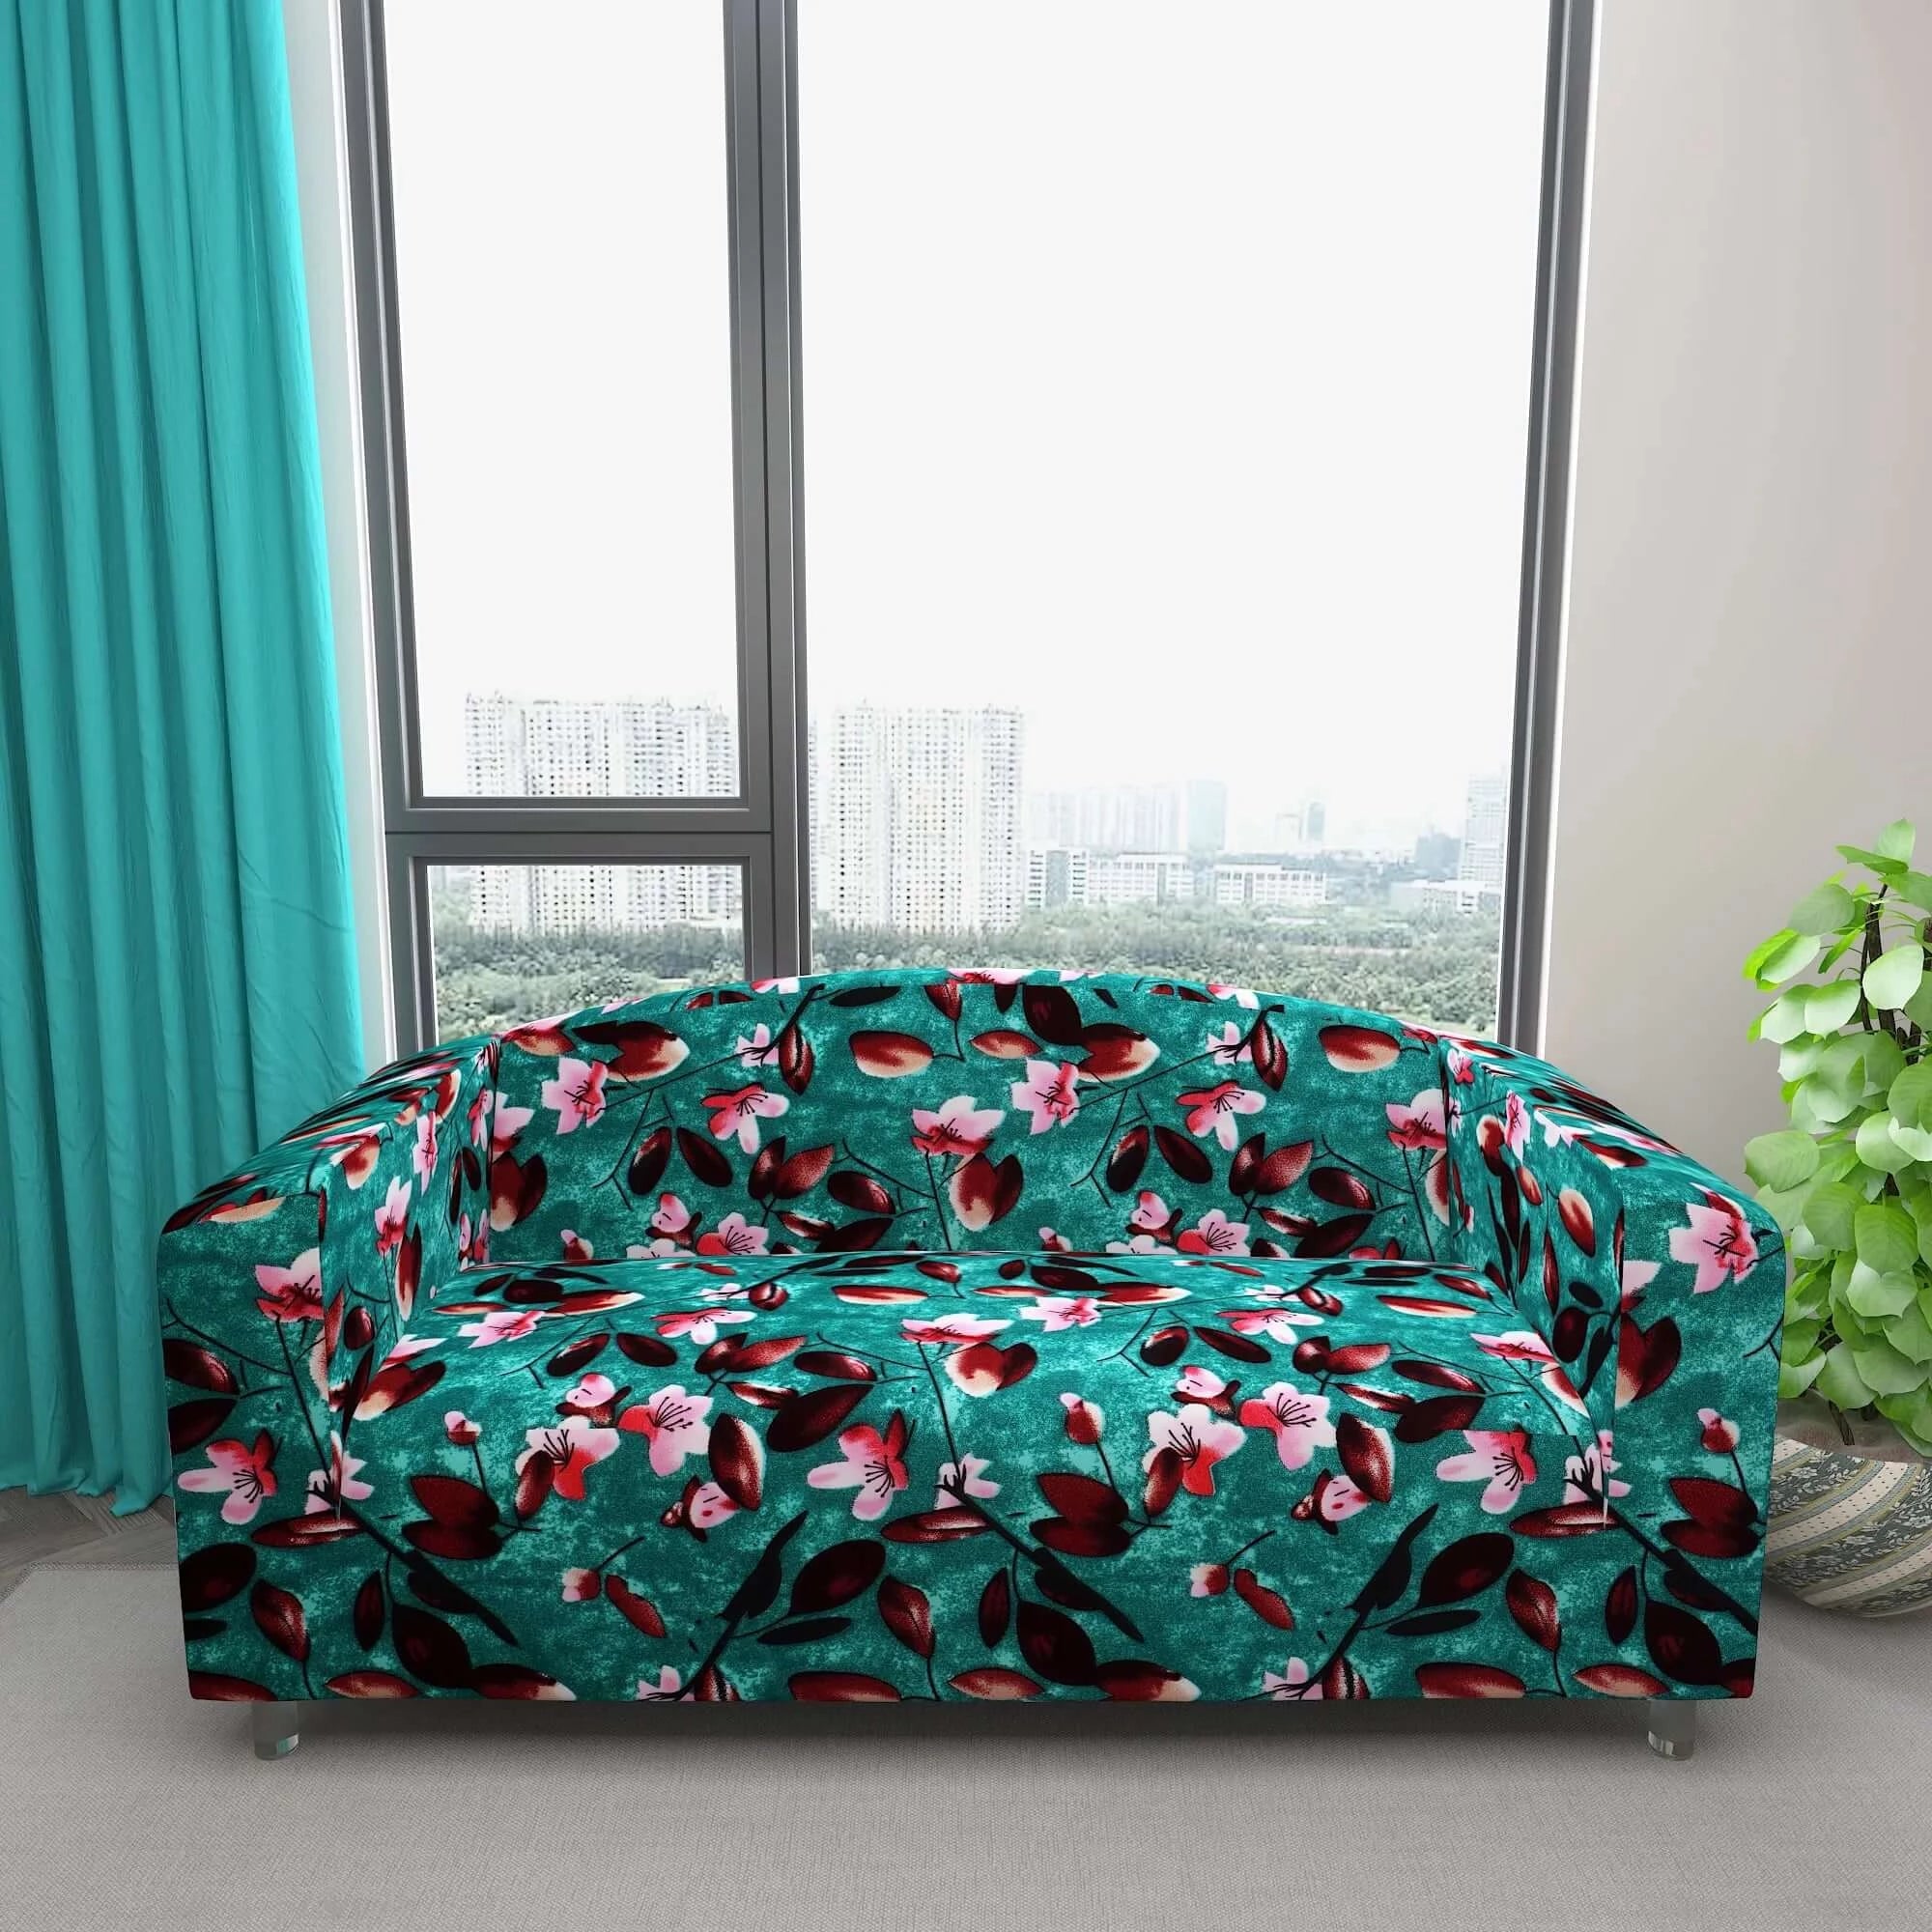 Marigold Printed Sofa Protector Cover Full Stretchable, MG11 - Dream Care Furnishings Private Limited